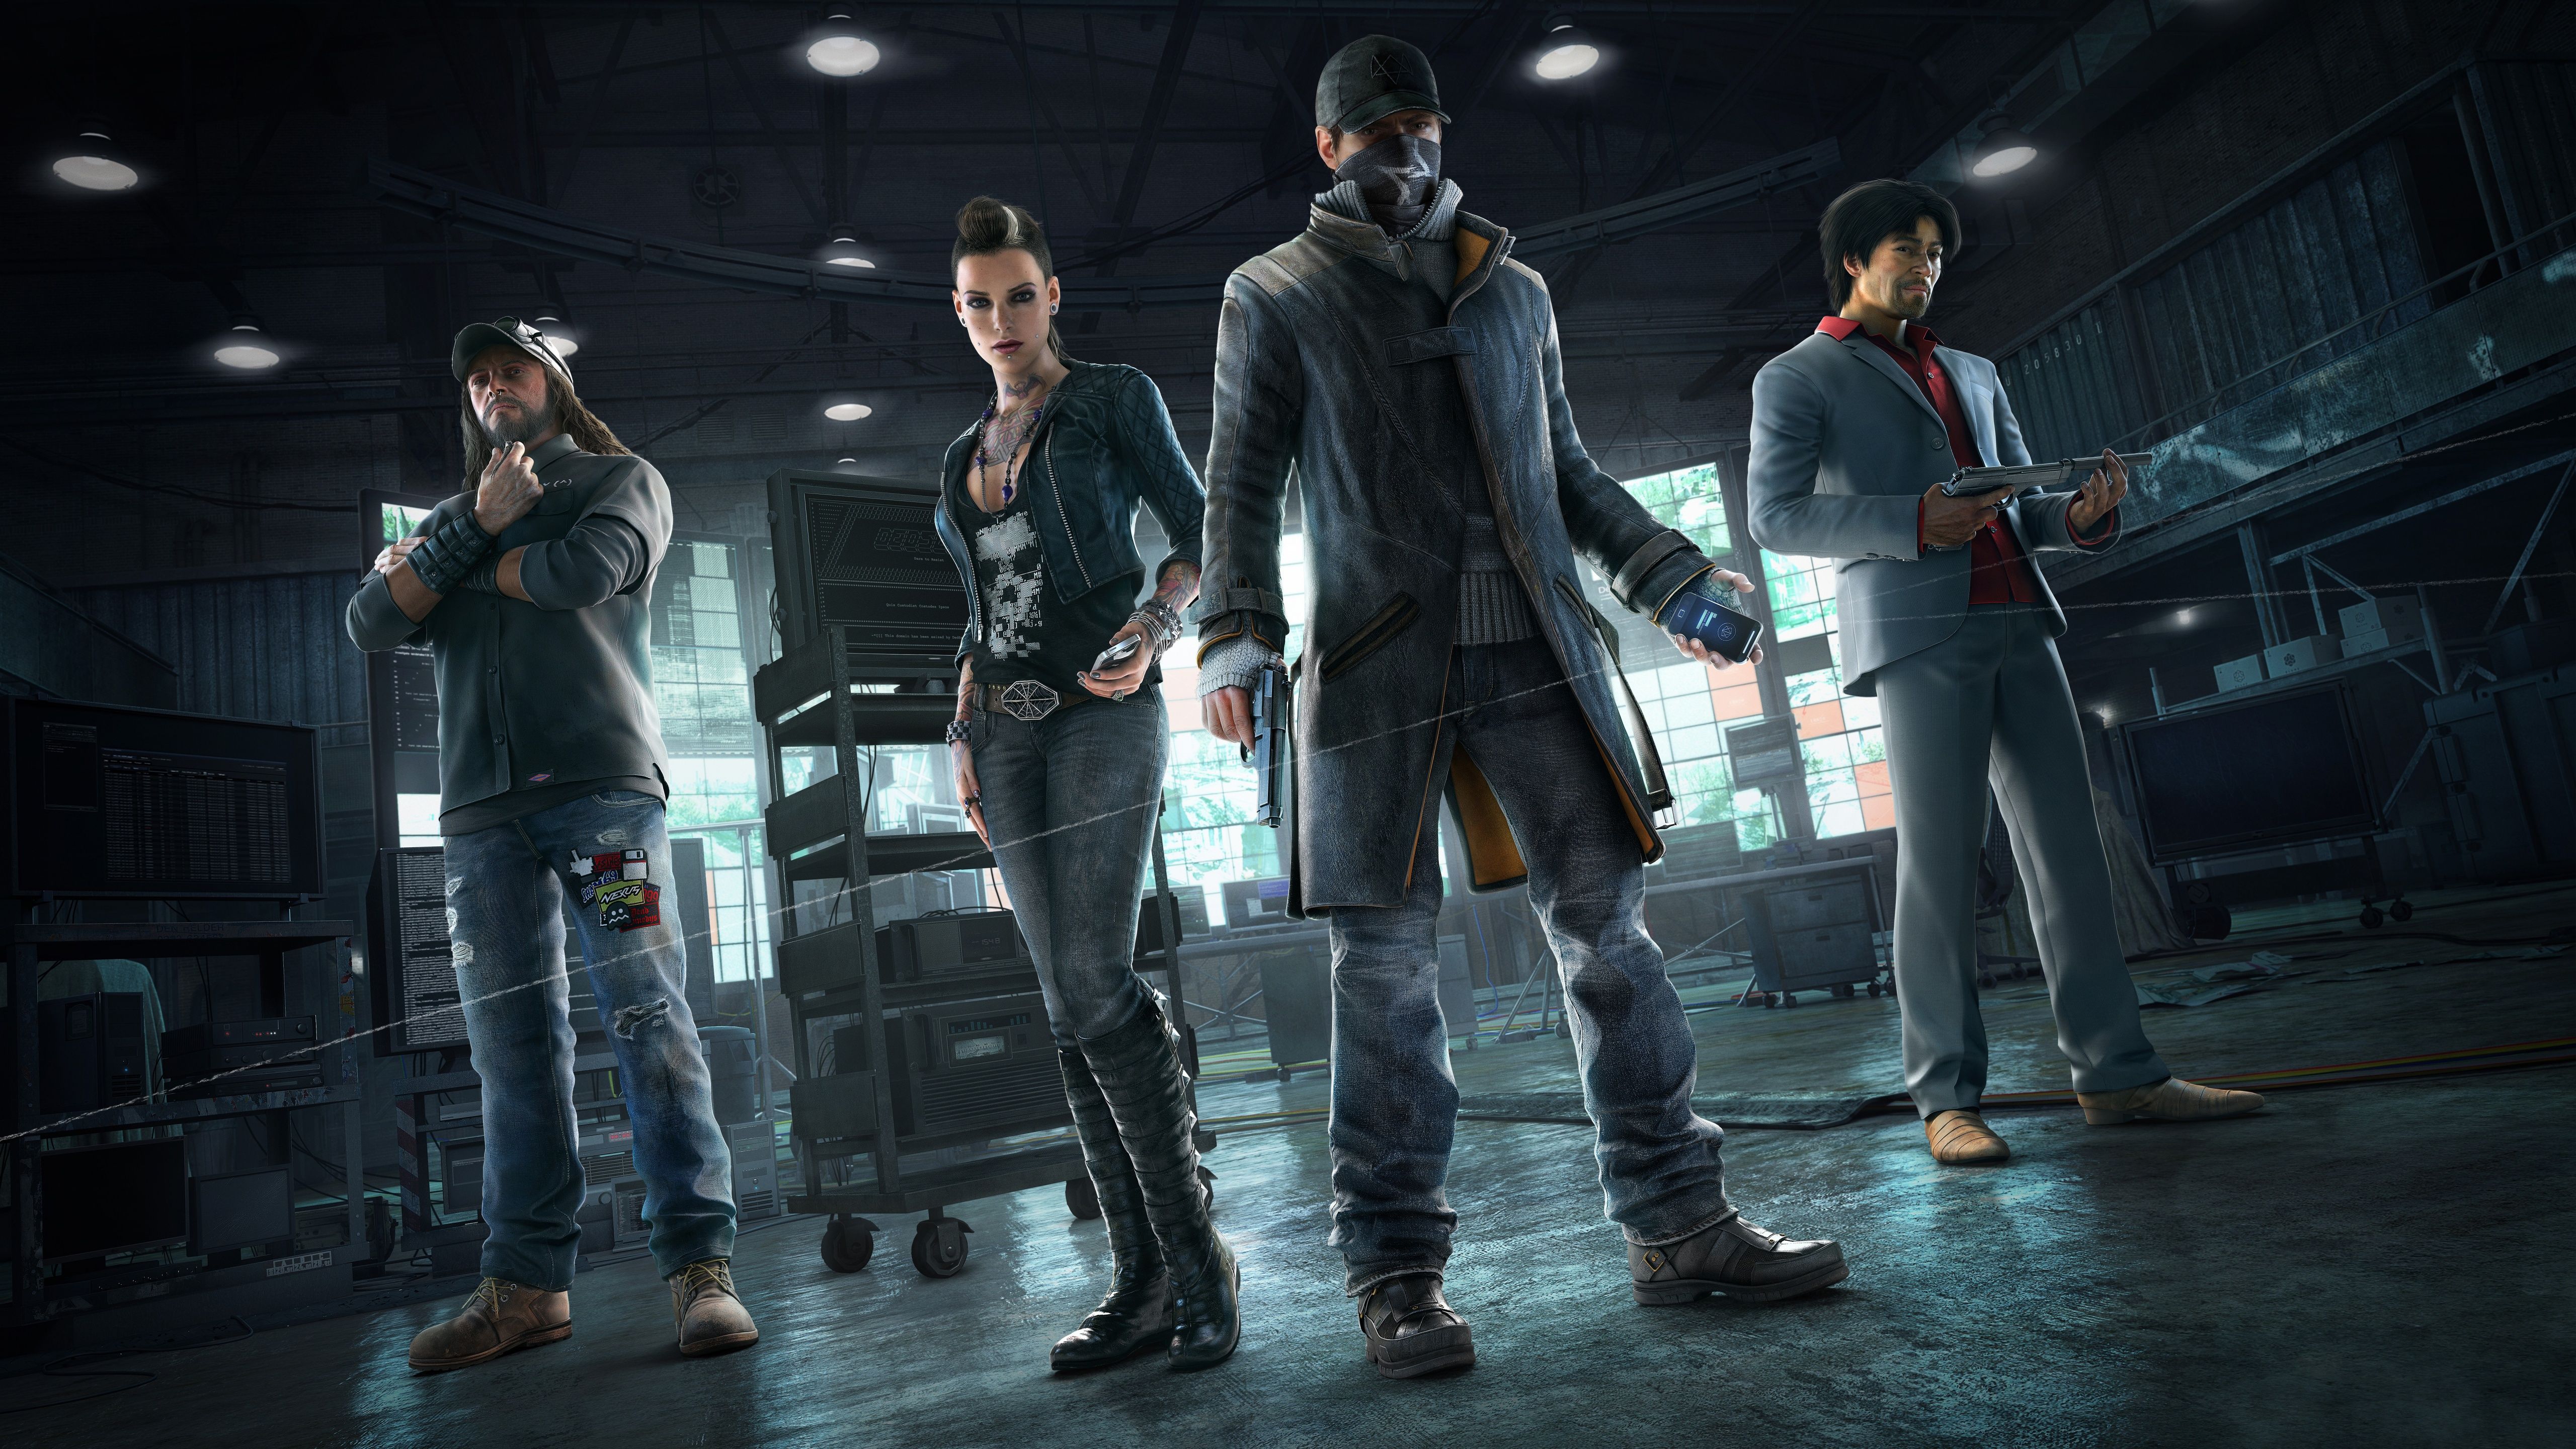 Watch Dogs 2 Wallpaper in jpg format for free download